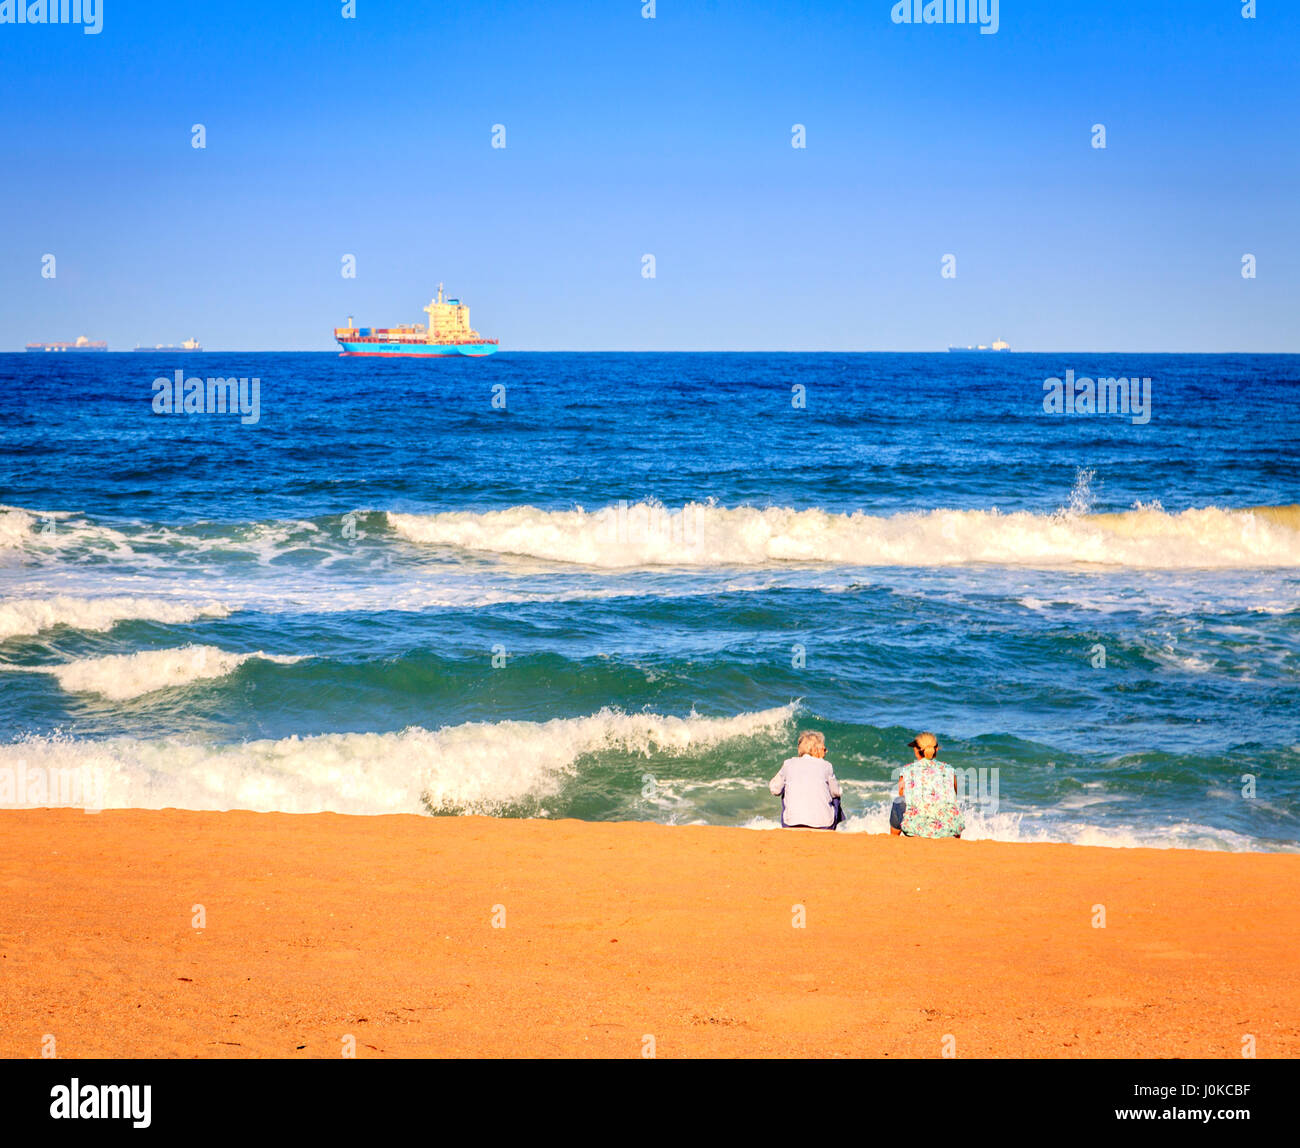 Two women are enjoying sunny evening on the beach in Durban, South Africa Stock Photo